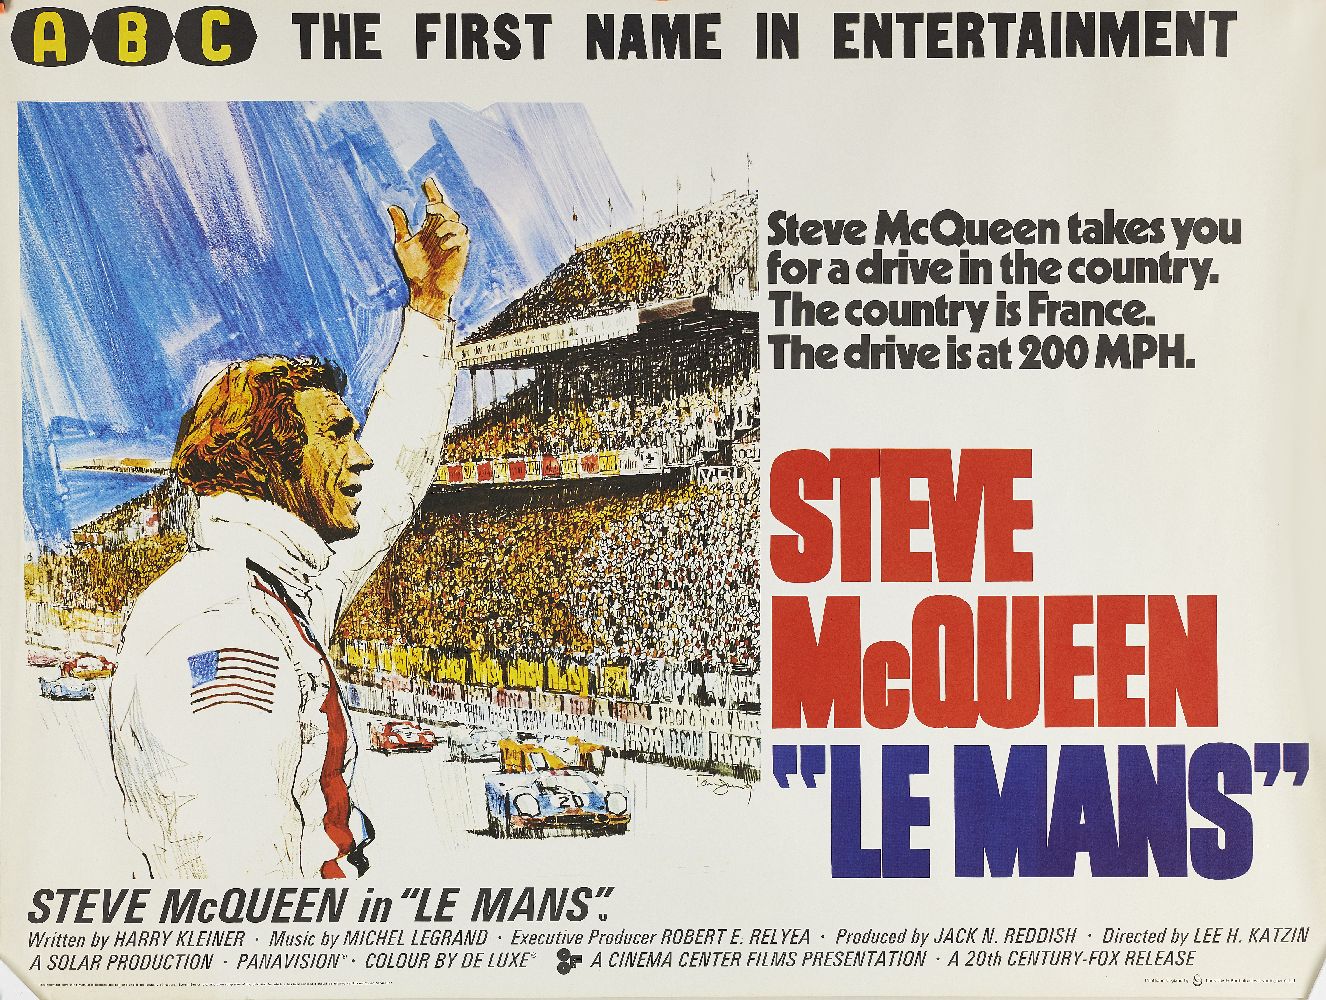 Le Mans, 1971, a film poster, UK Quad, printed by Lonsdale and Bartholomew, 72 x 102cm Note: Le Mans